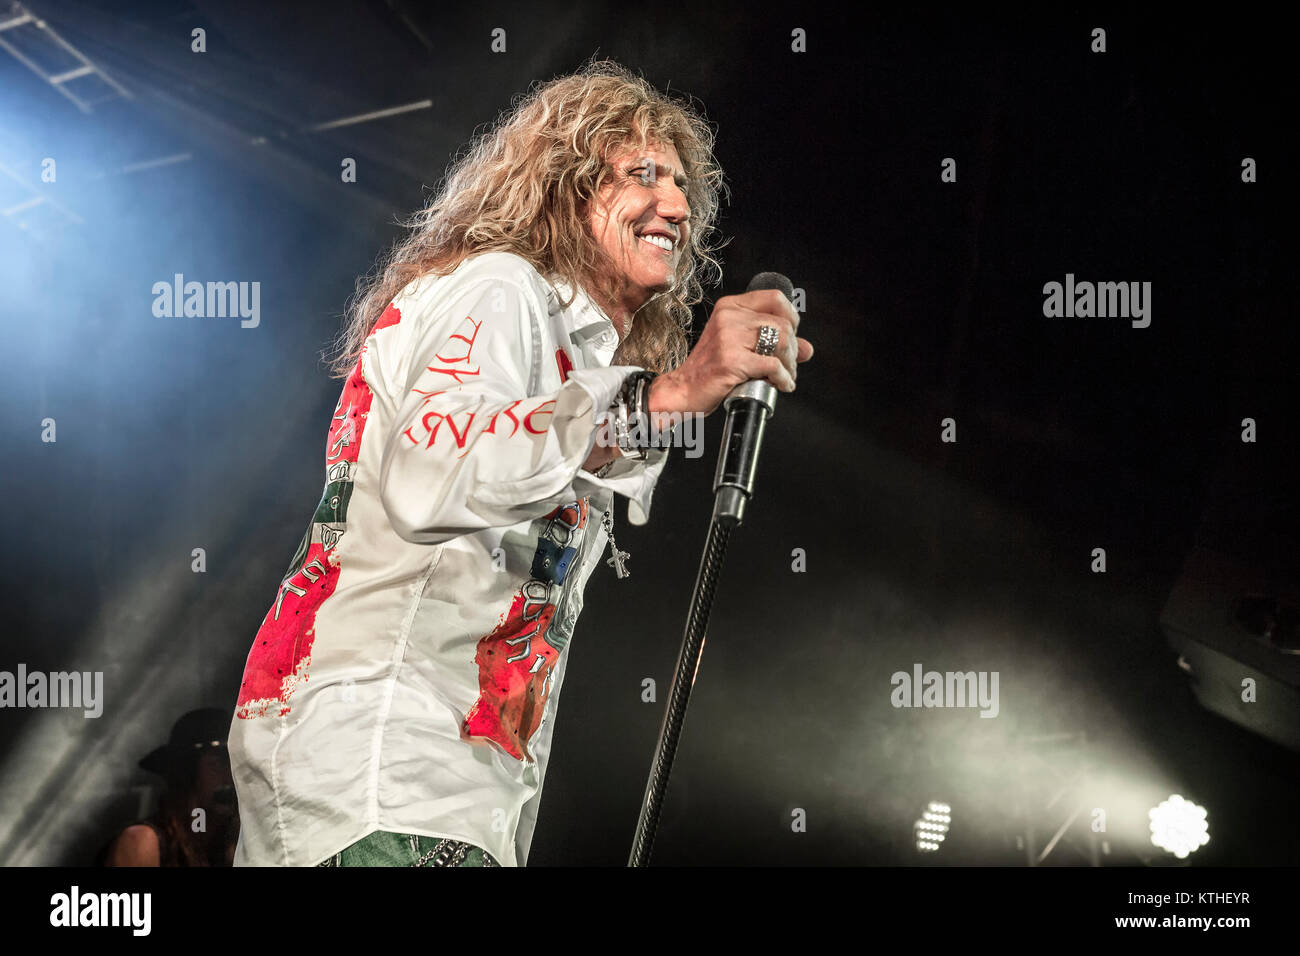 The English rock band Whitesnake performs a live concert at Sentrum Scene in Oslo. Here vocalist David Coverdale is seen live on stage. Norway, 26/07 2016. Stock Photo